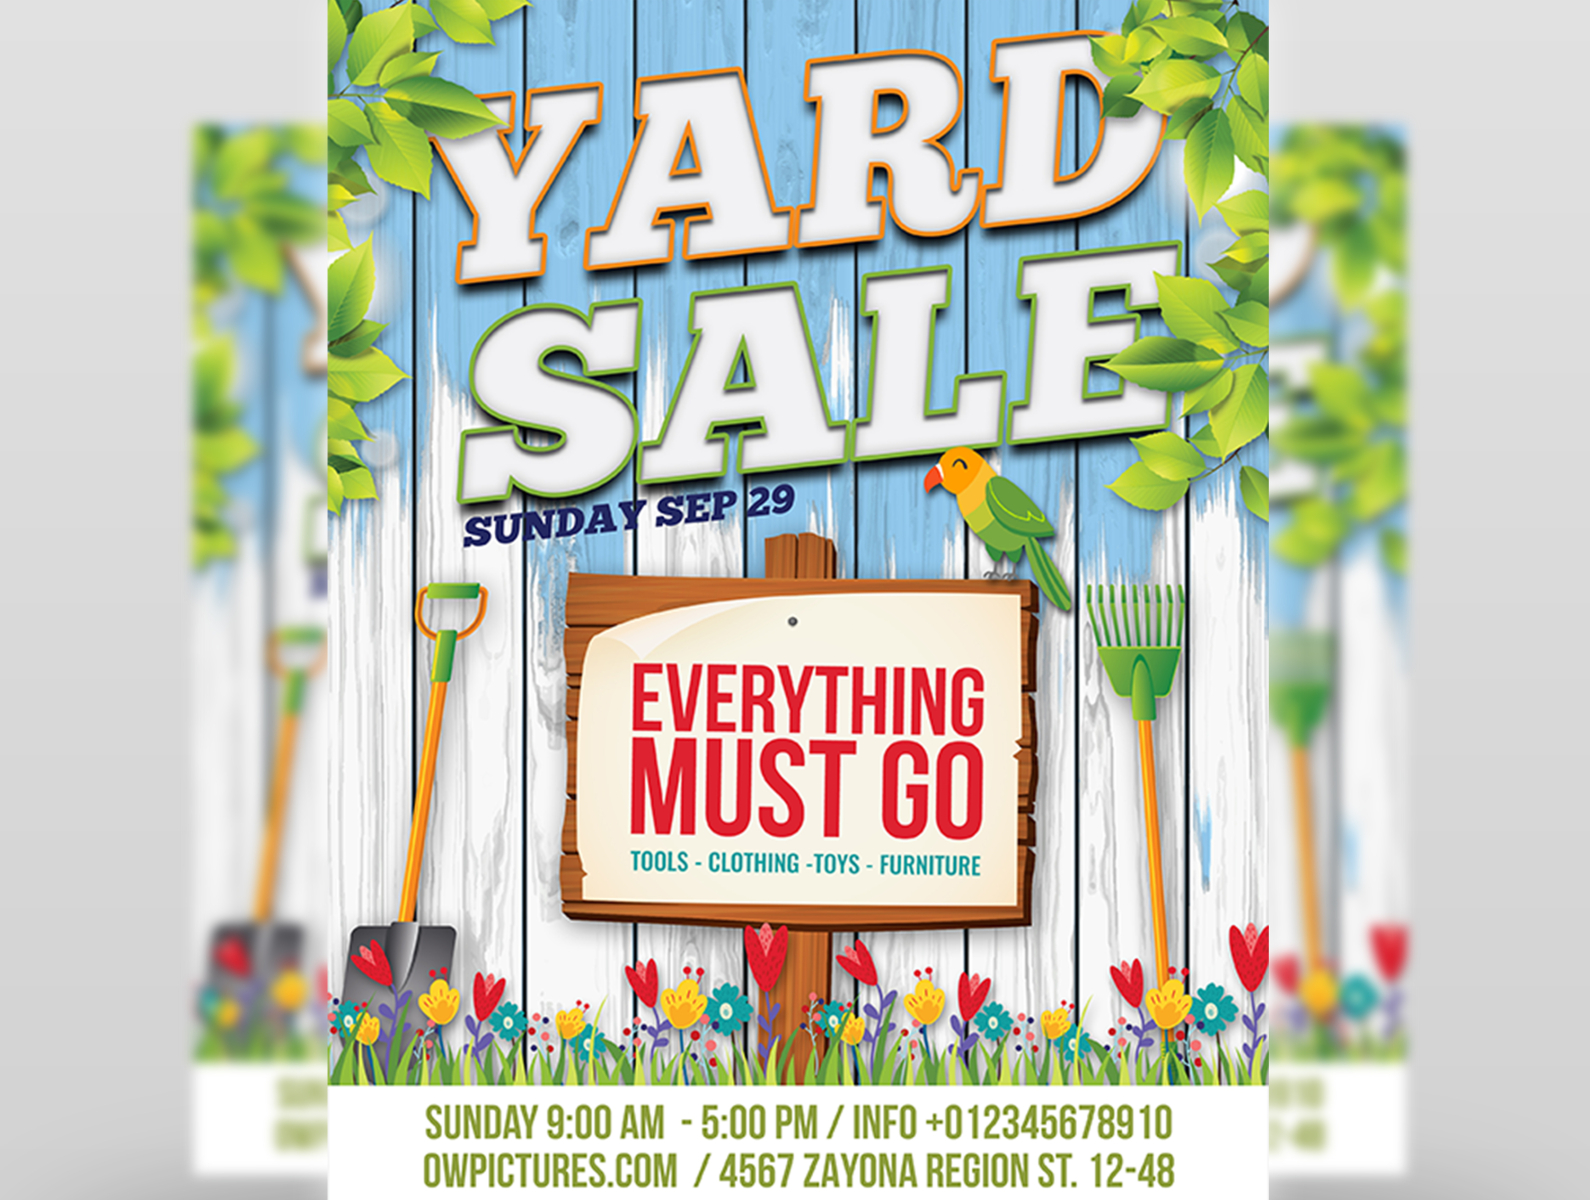 Yard Sale - Garage Sales Flyer Template by OWPictures on Dribbble Regarding Free Yard Sale Flyer Template